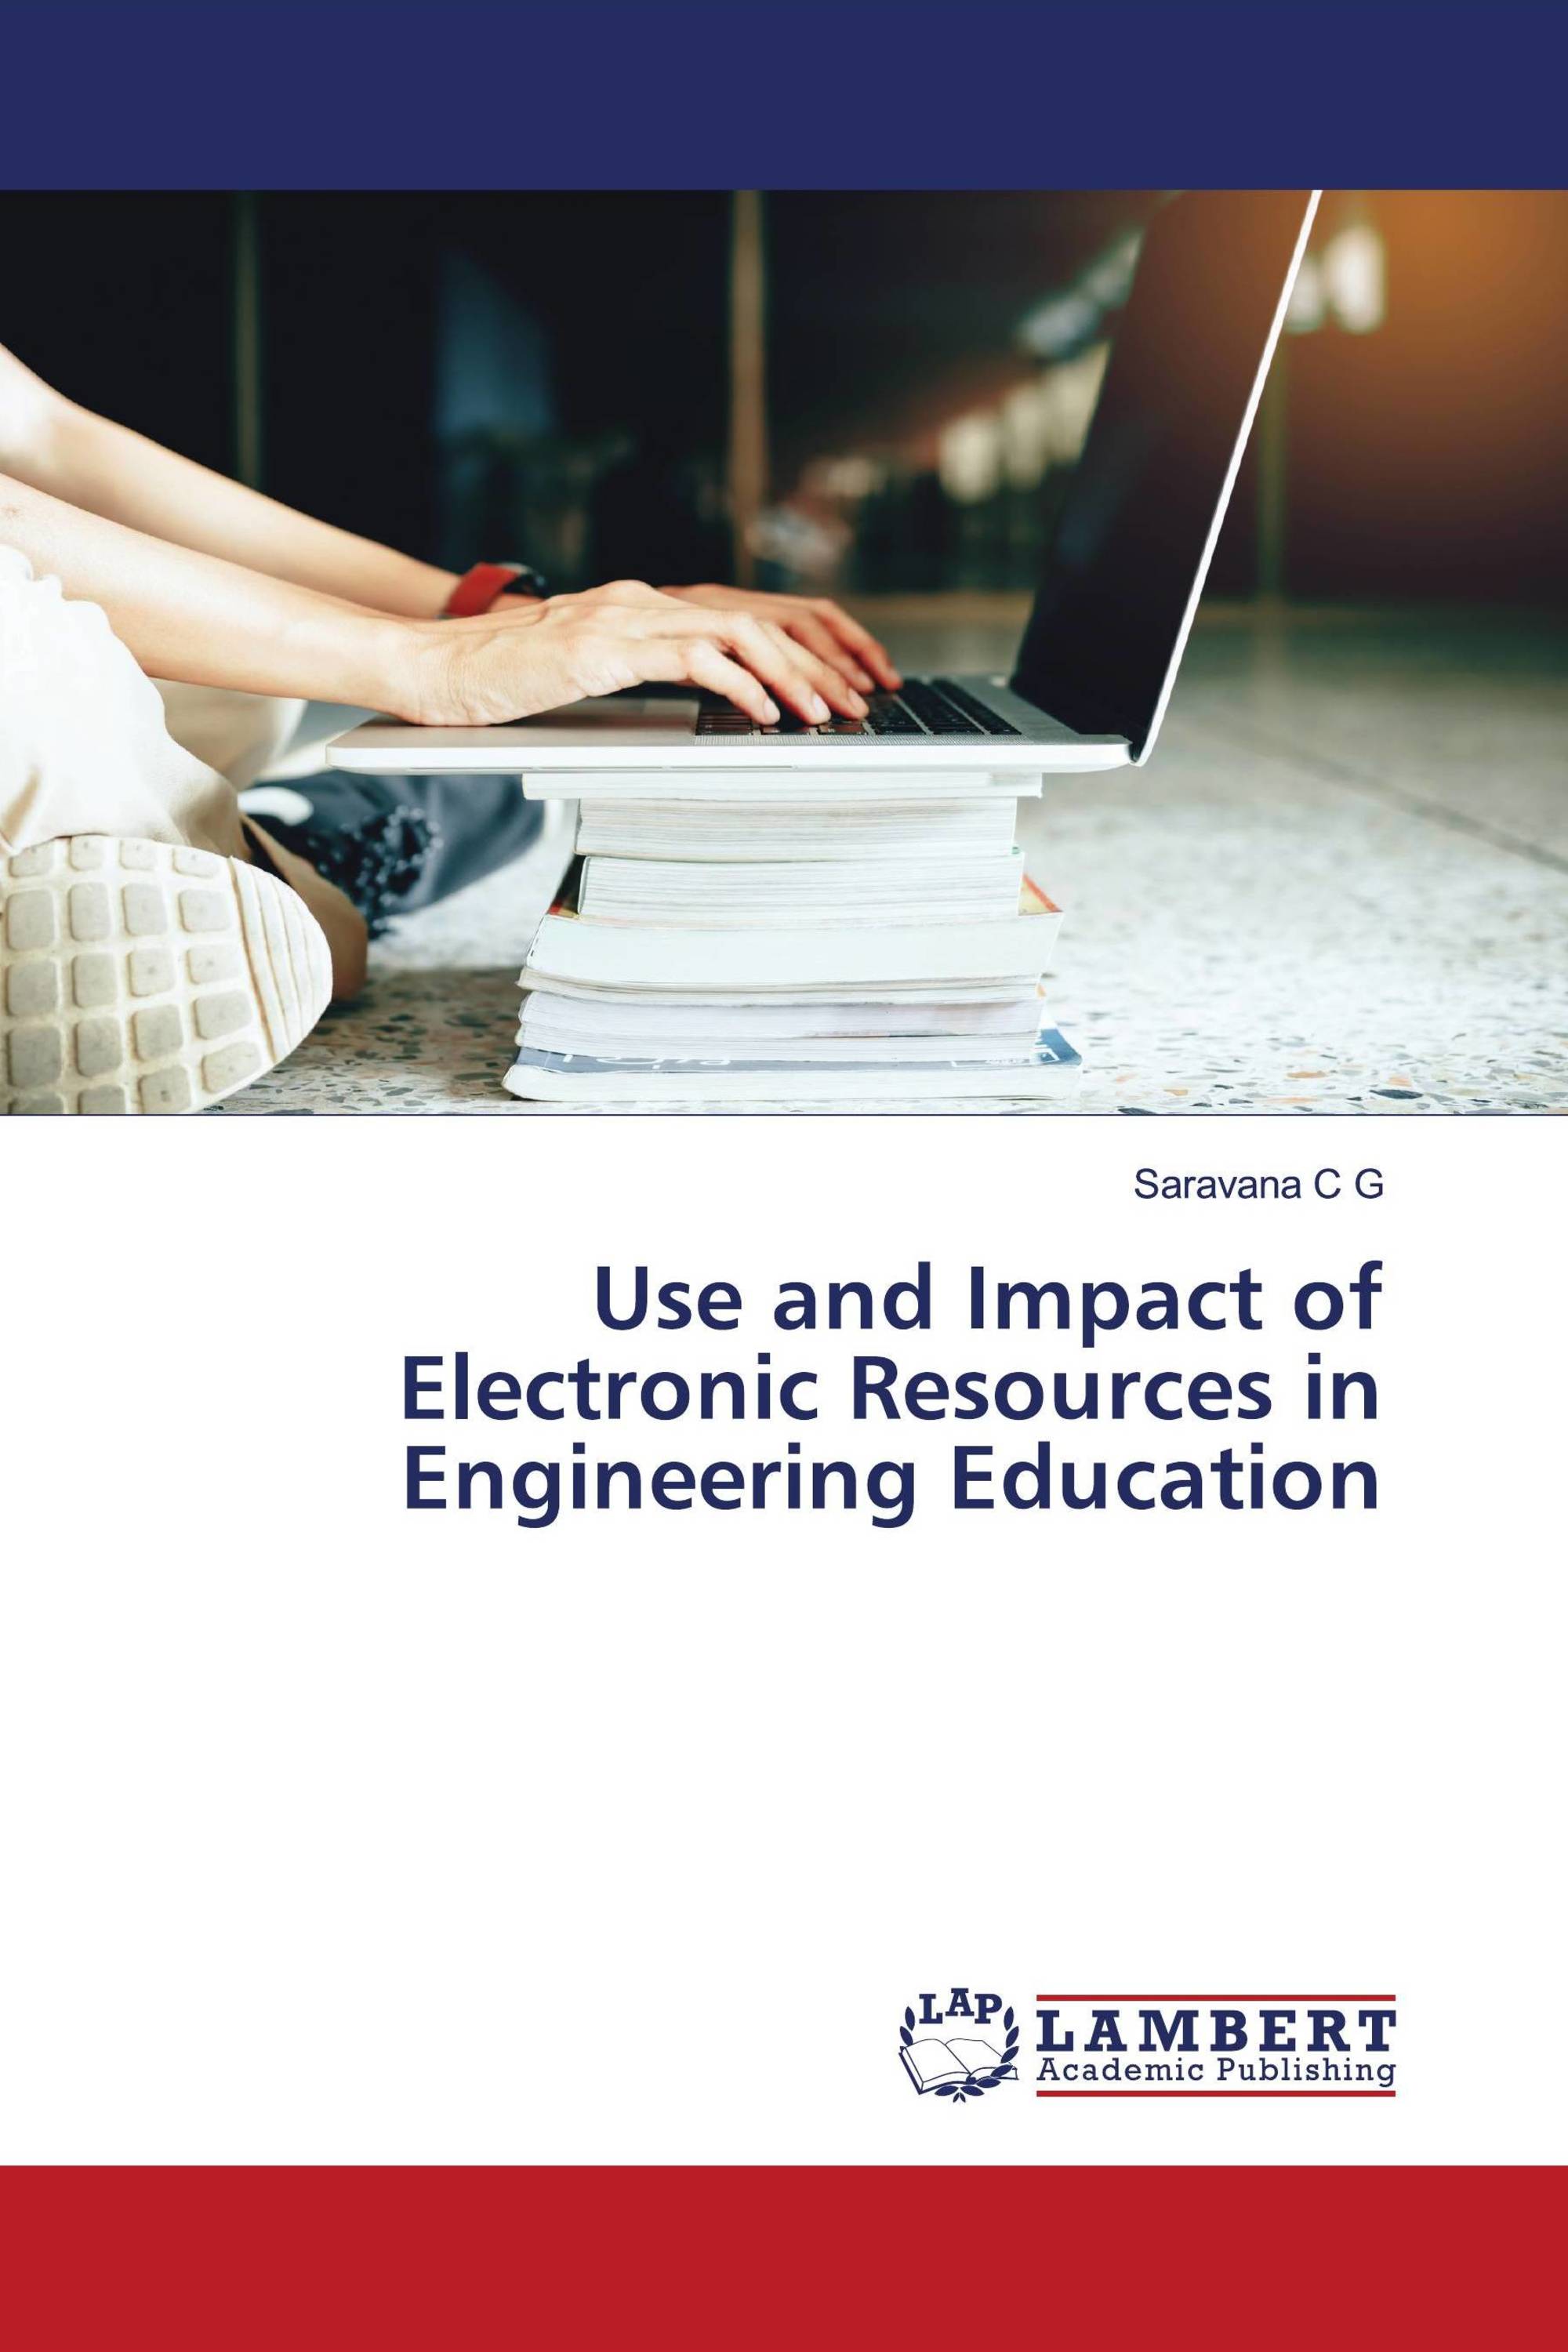 Use and Impact of Electronic Resources in Engineering Education